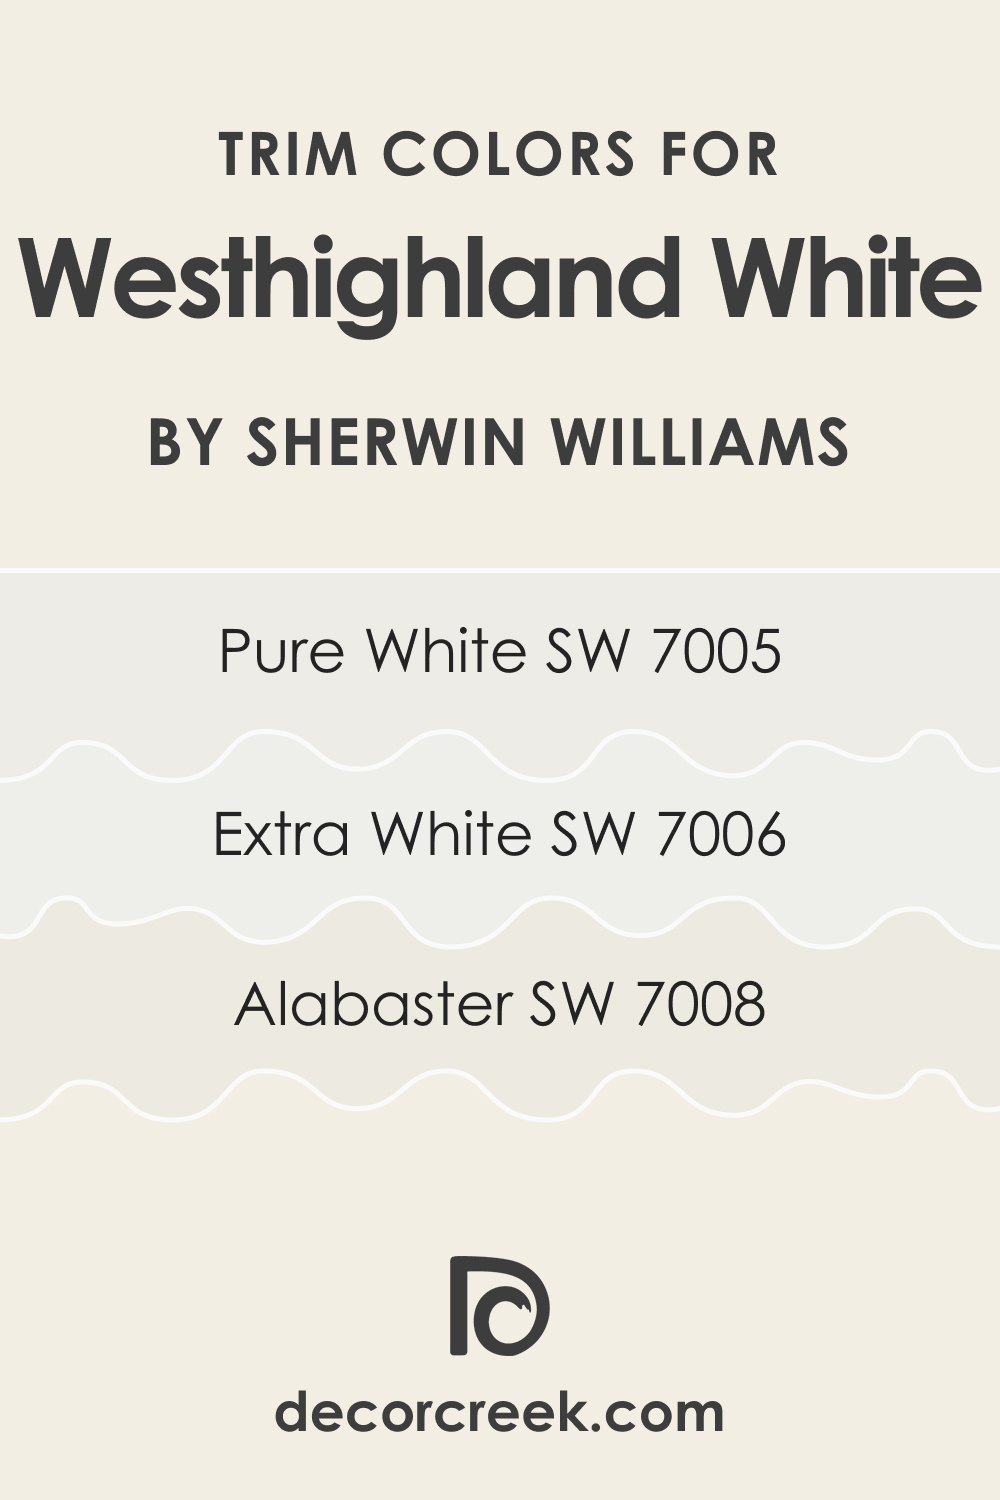 Trim Colors of SW 7566 Westhighland White